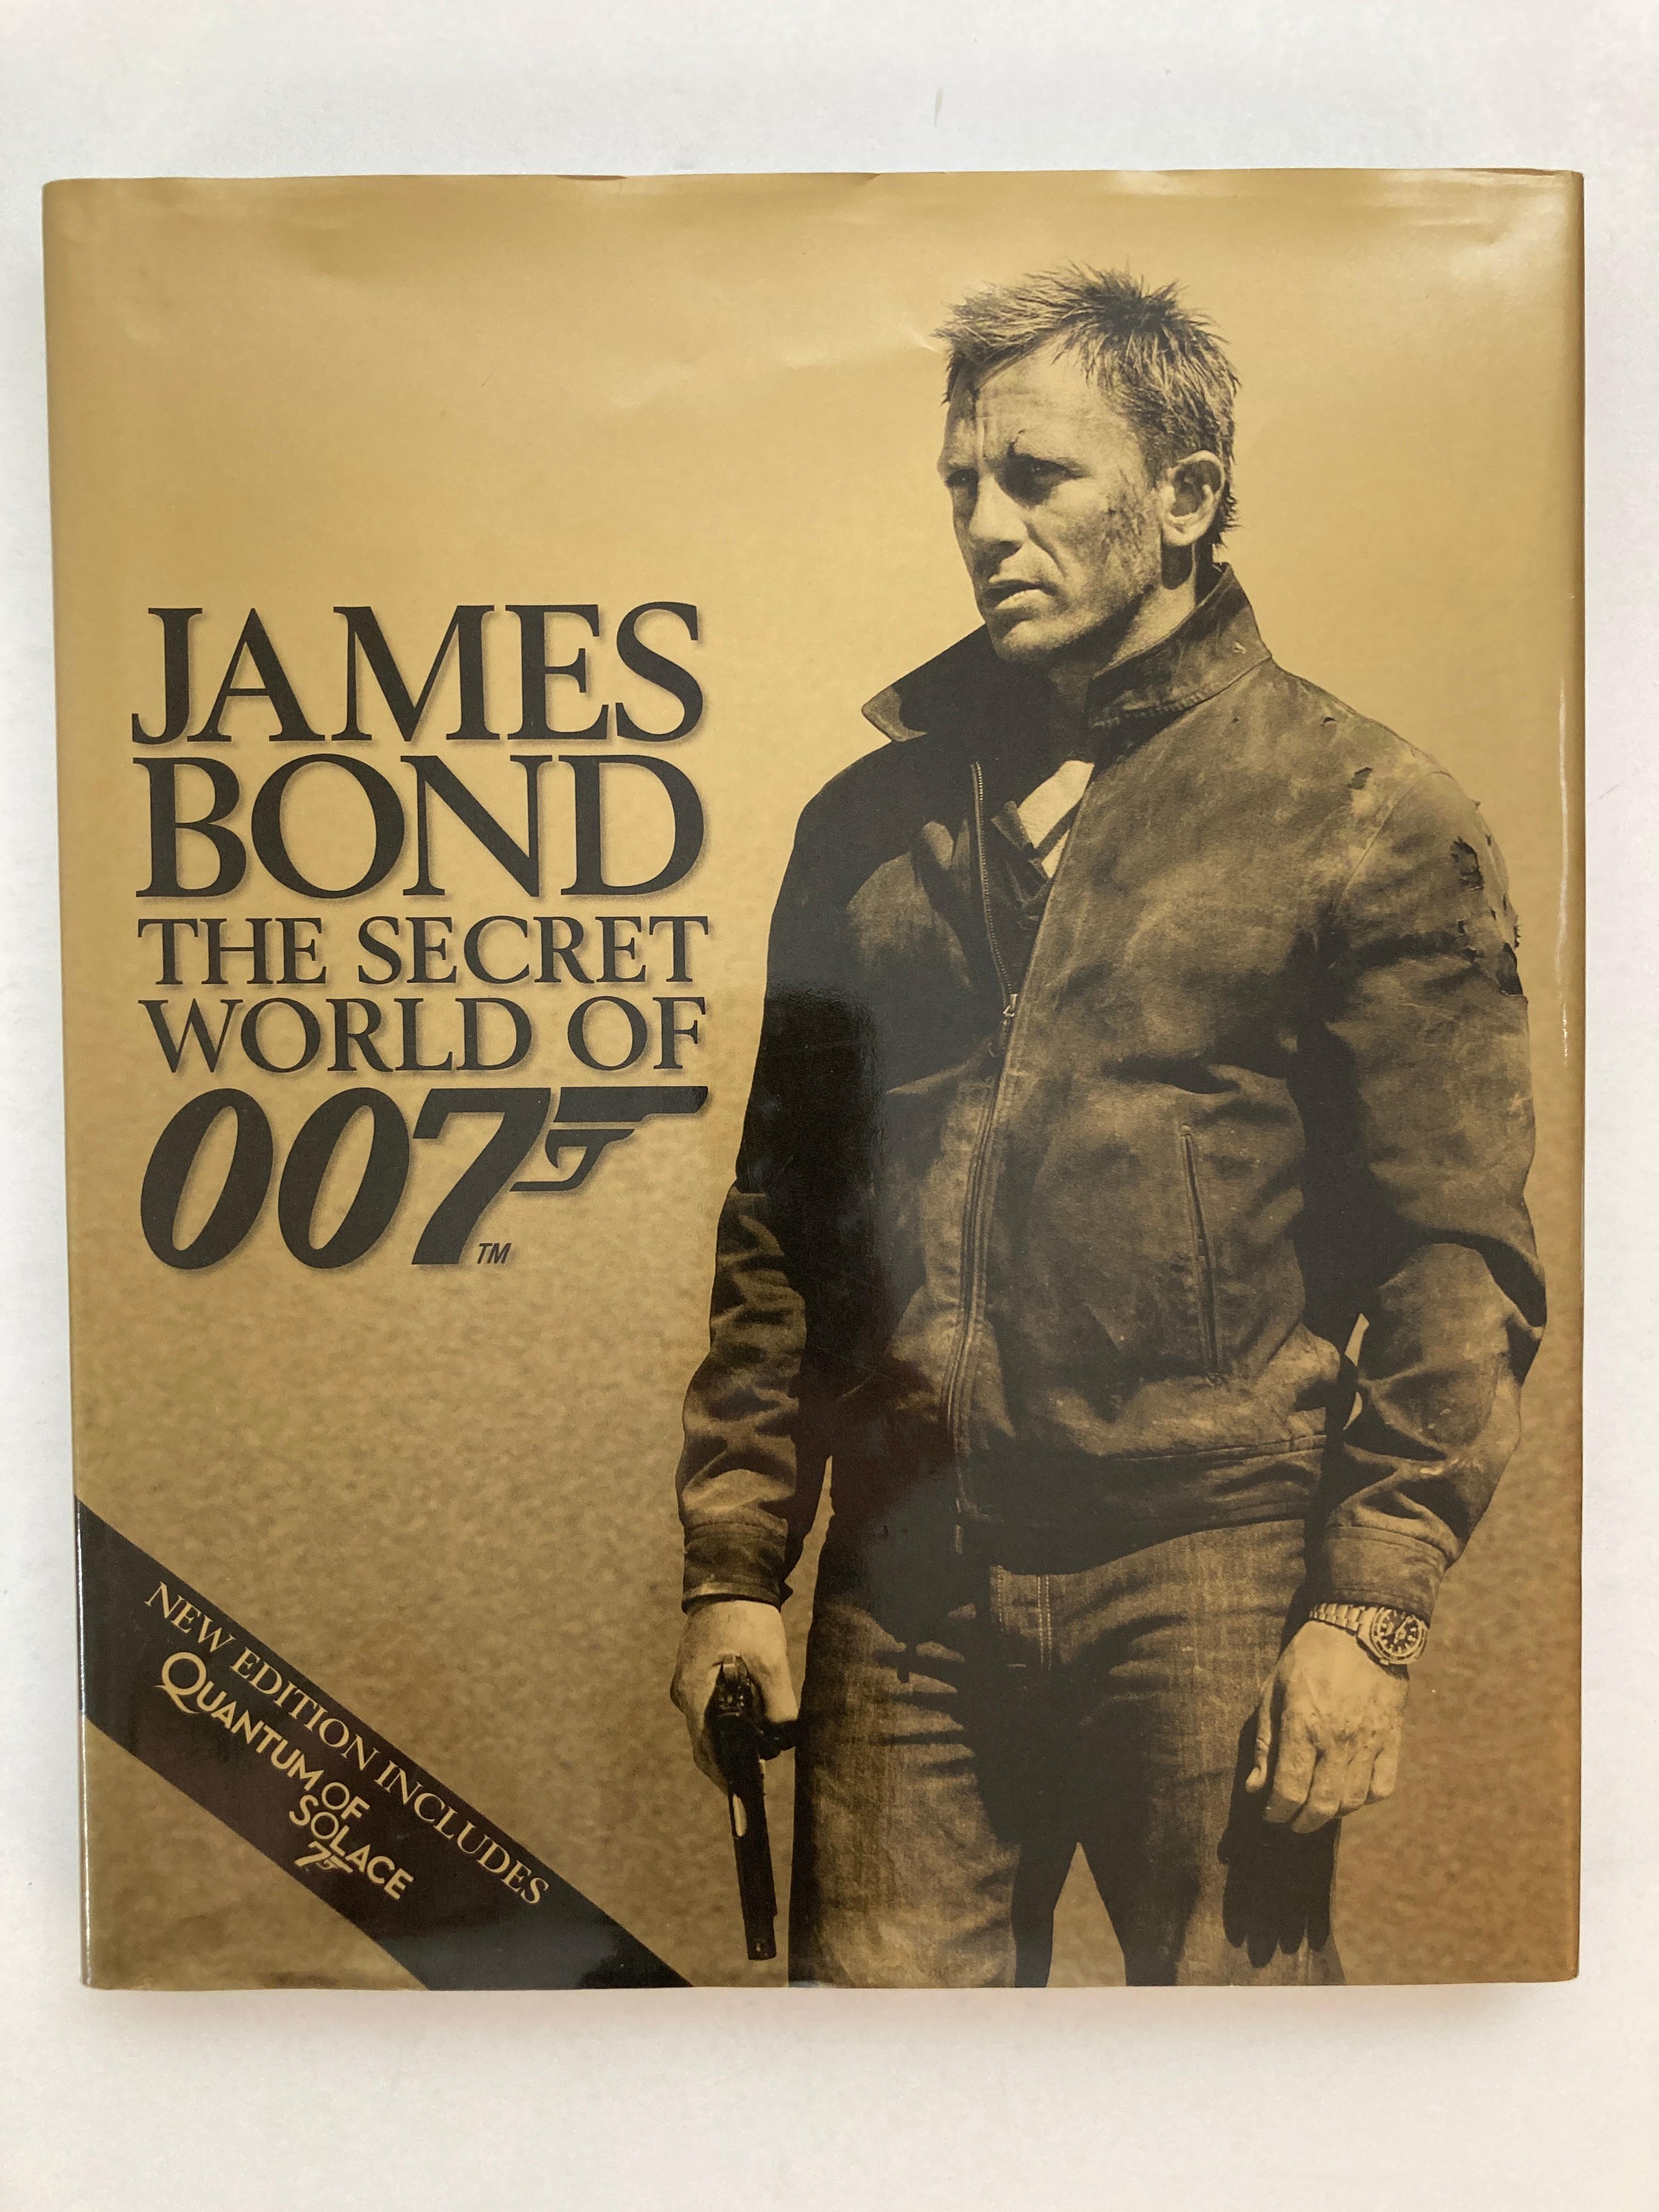 James Bond: The Secret World of 007
Dougall, Alastair
Expanded to include information on the latest Bond film, Quantum of Solace, a detailed photographic journey into the James Bond films, published with the assistance of their producers, includes